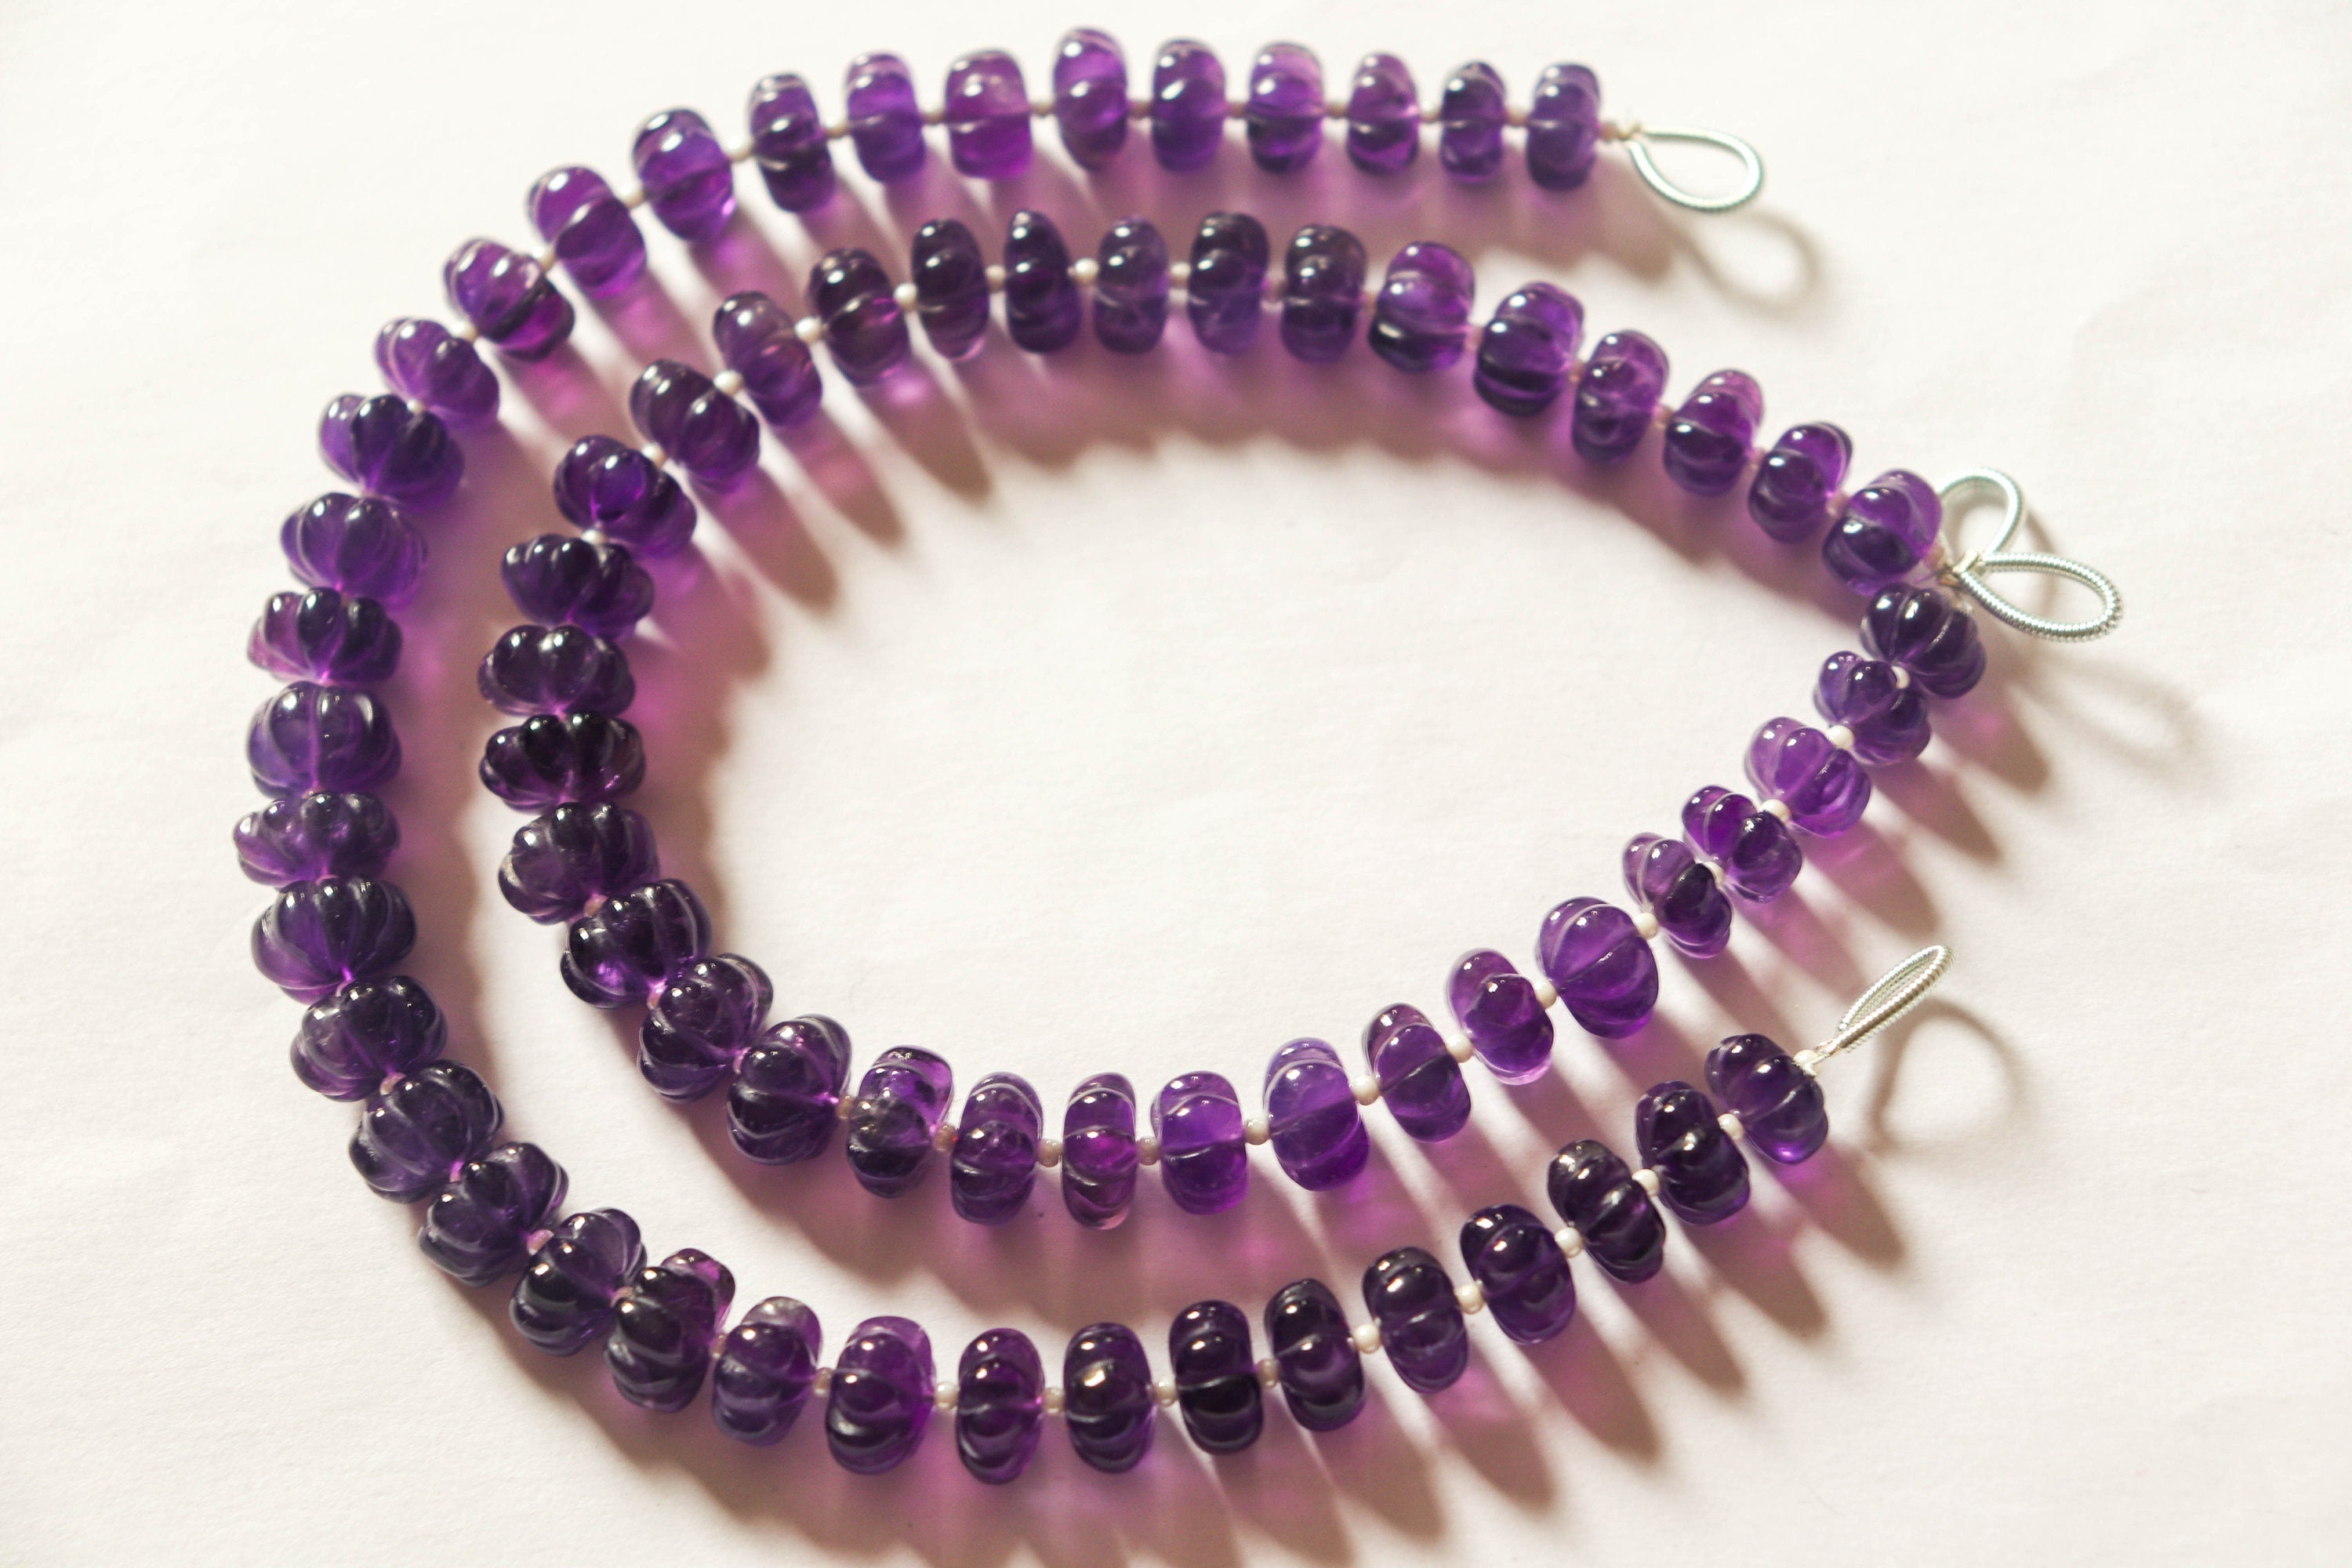 10 Inch AFRICAN AMETHYST Carved Melons beads | 10mm | 35 Pcs | Very good Quality | Center Drill |  Natural Gemstone Beads for jewelry making Beadsforyourjewelry